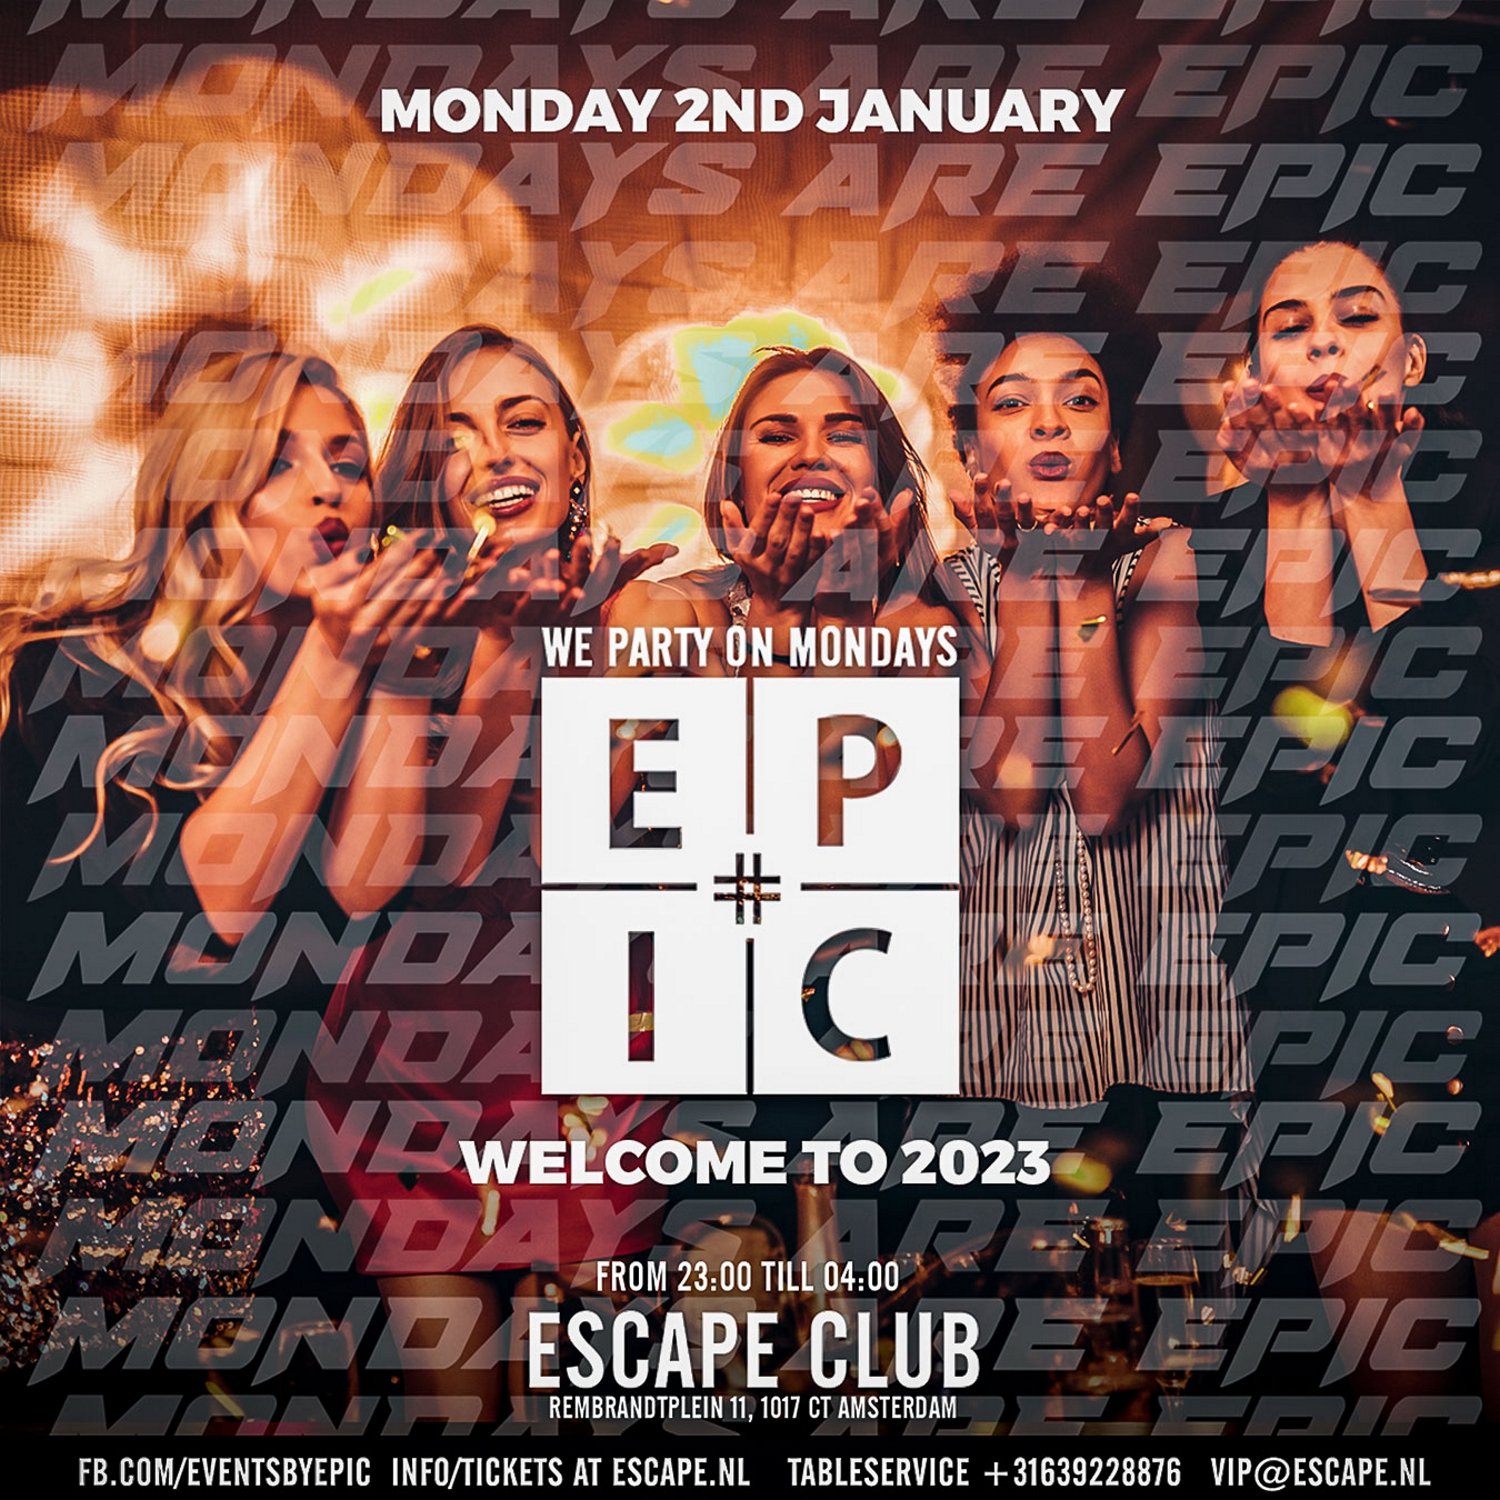 Mondays are Epic - Welcome to 2023